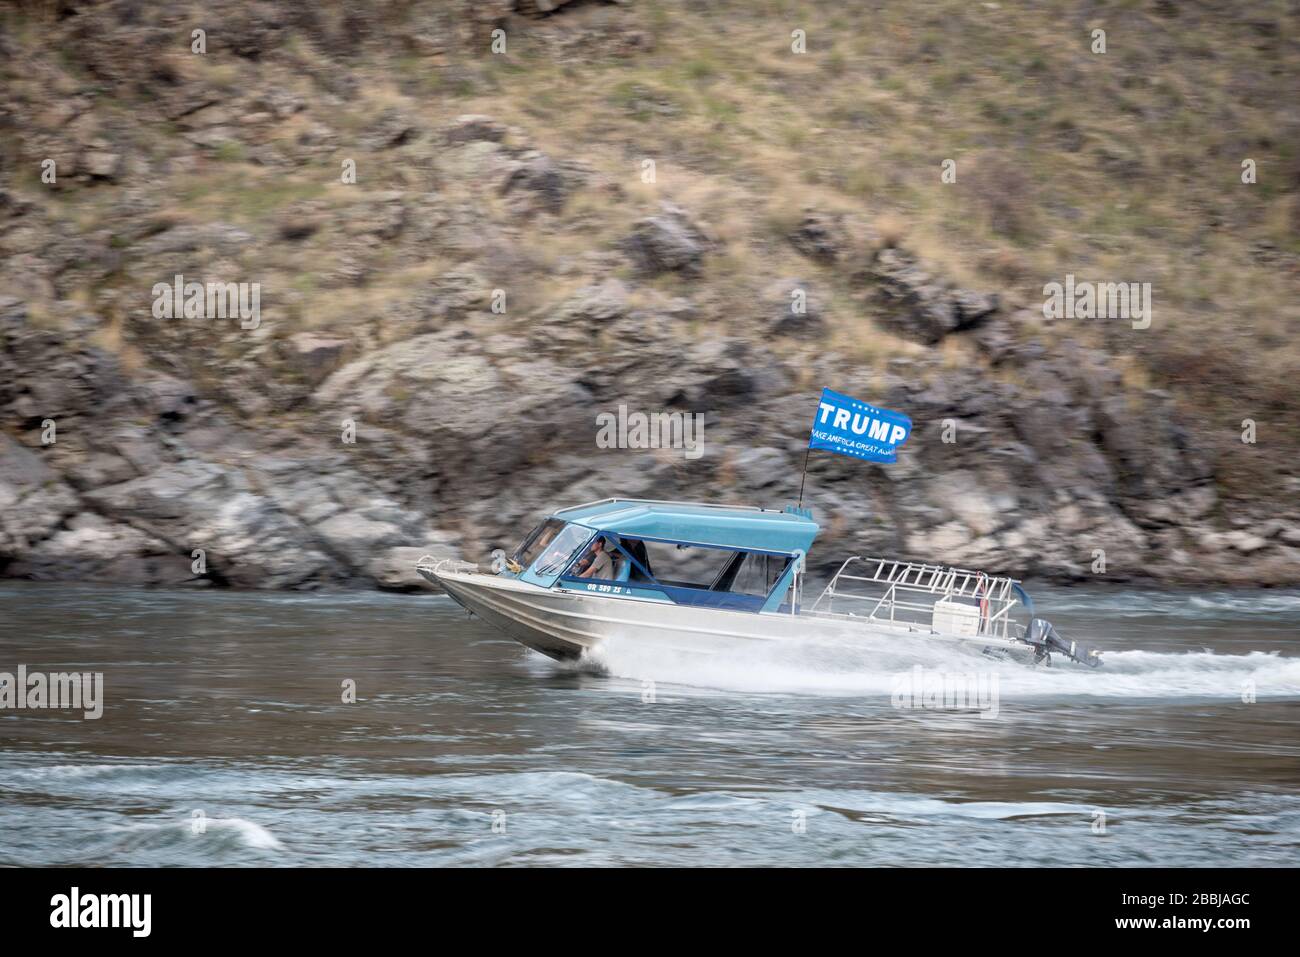 Jet boat with Trump flag on the Snake River in Hells Canyon, Oregon/Idaho. Stock Photo